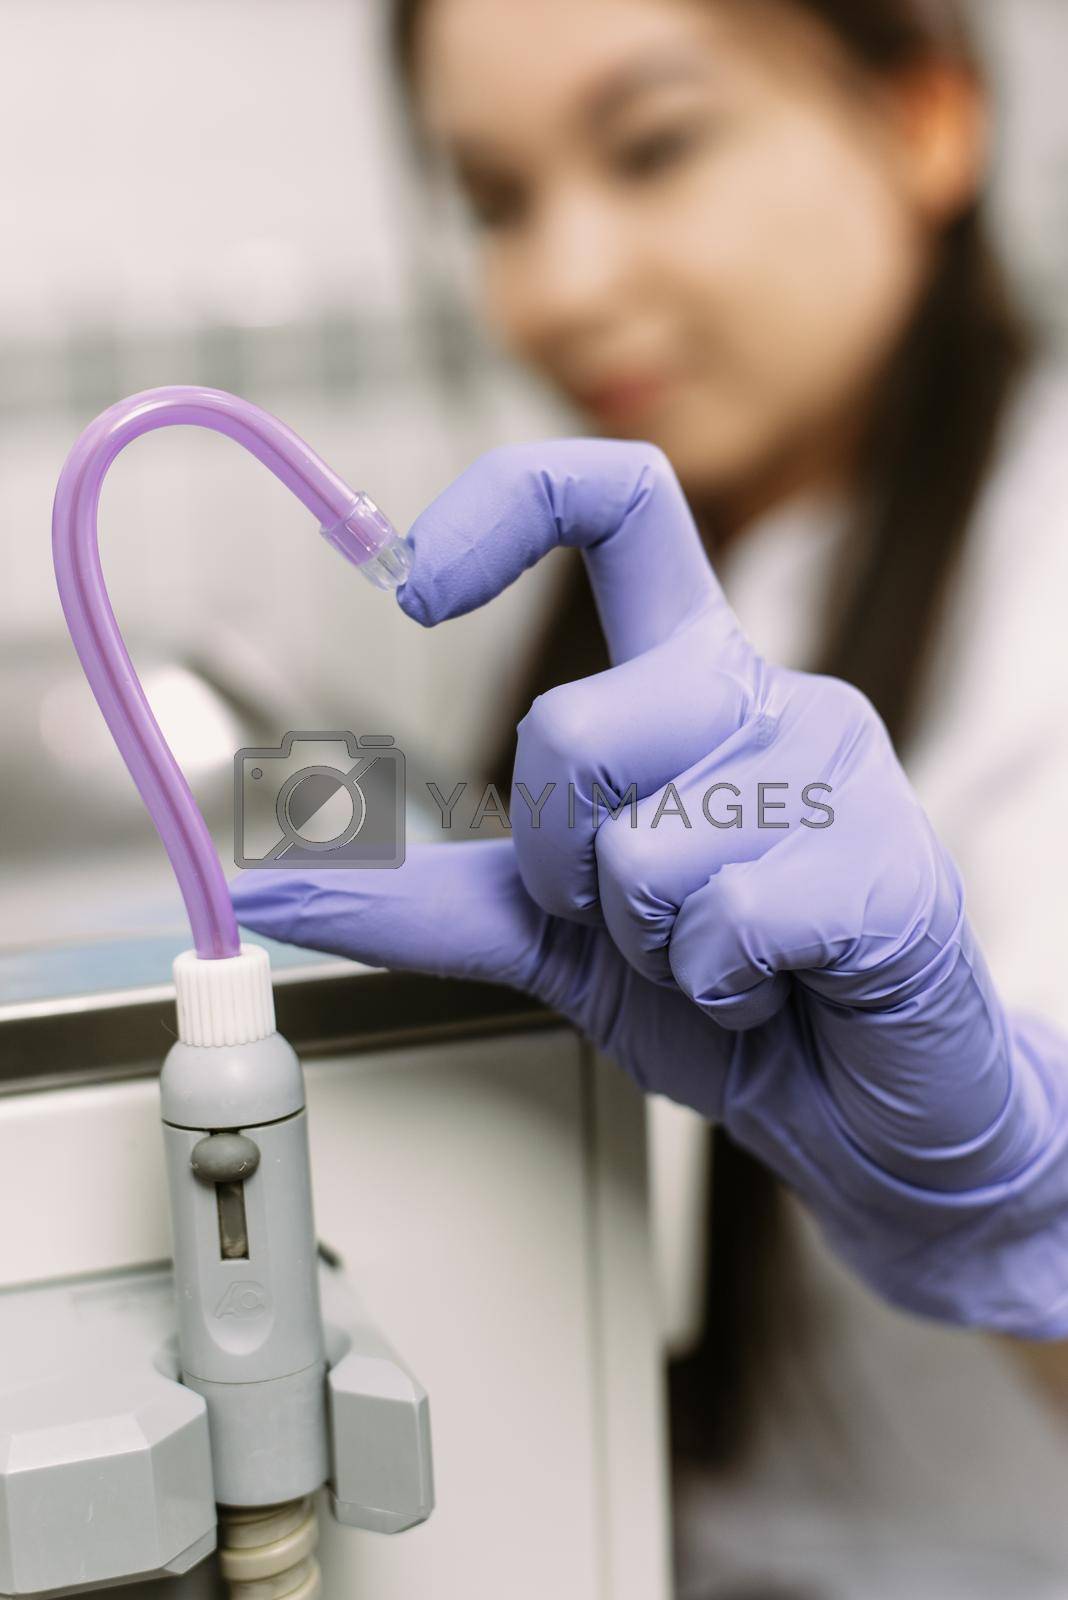 Royalty free image of Hand in Blue latex glove and saliva ejector symbolize love in dentistry. Heart symbol. Dental treatment, healthcare and dentistry concept by etonastenka